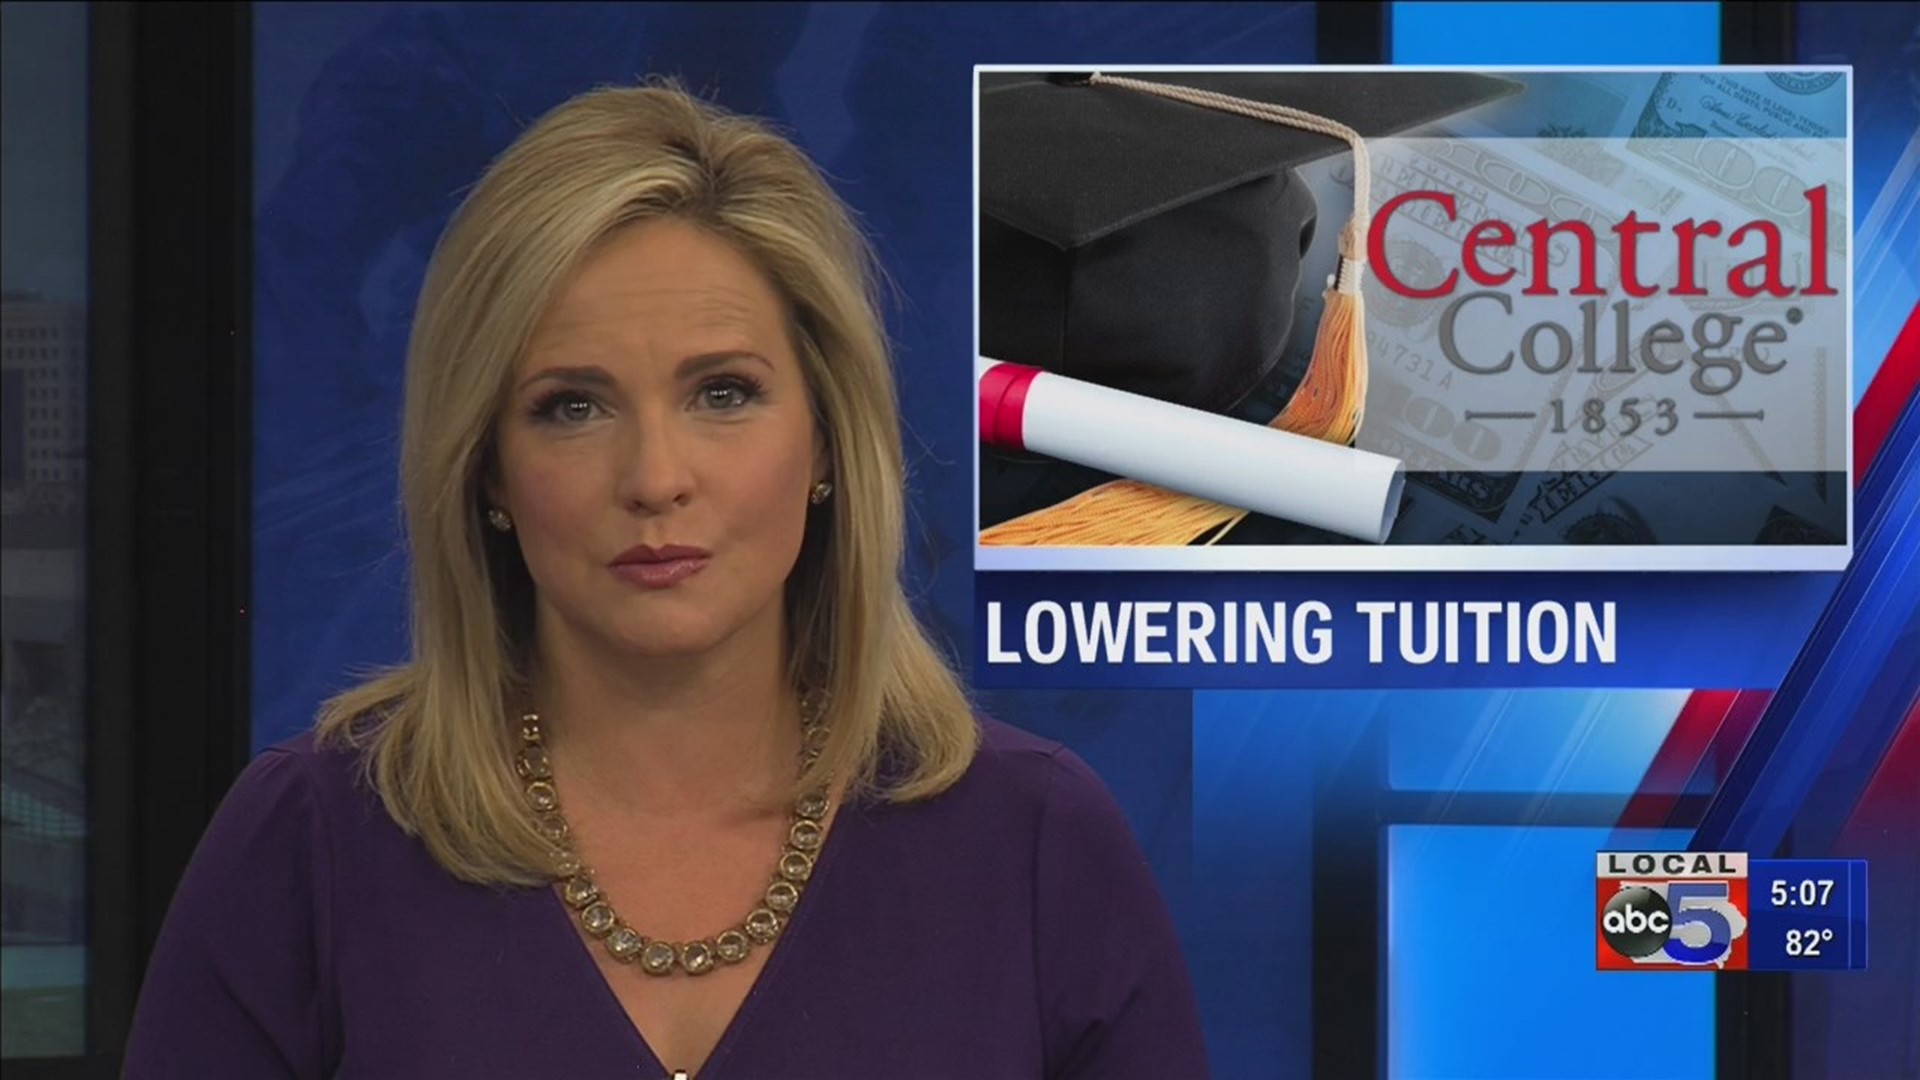 Central College announced Tuesday that annual tuition starting in the Fall of 2020 will drop from $38,600 to $18,600.